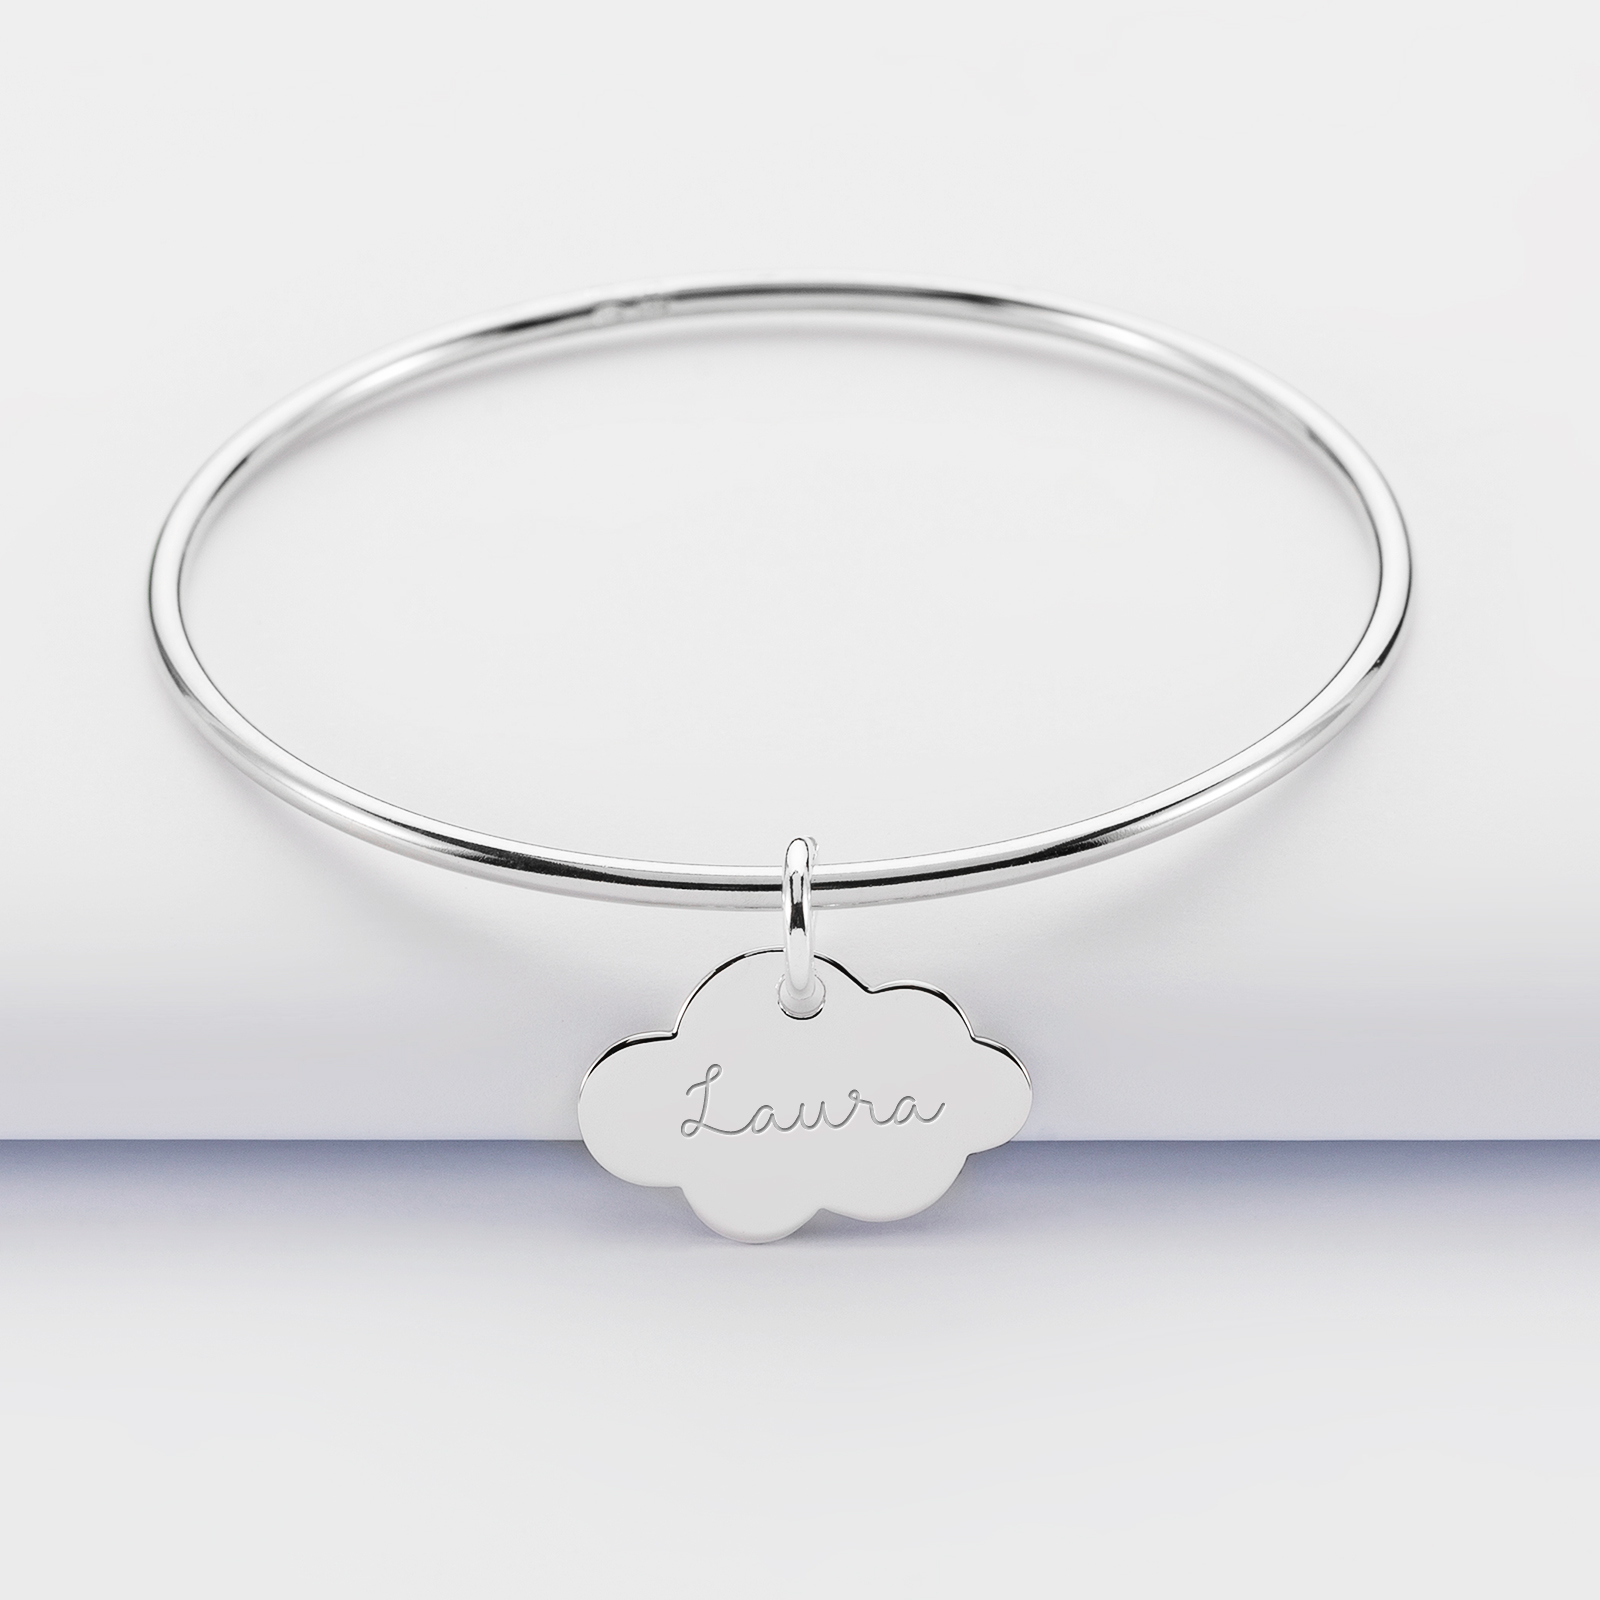 Personalised silver children's bangle and engraved cloud medallion 20x14 mm - name